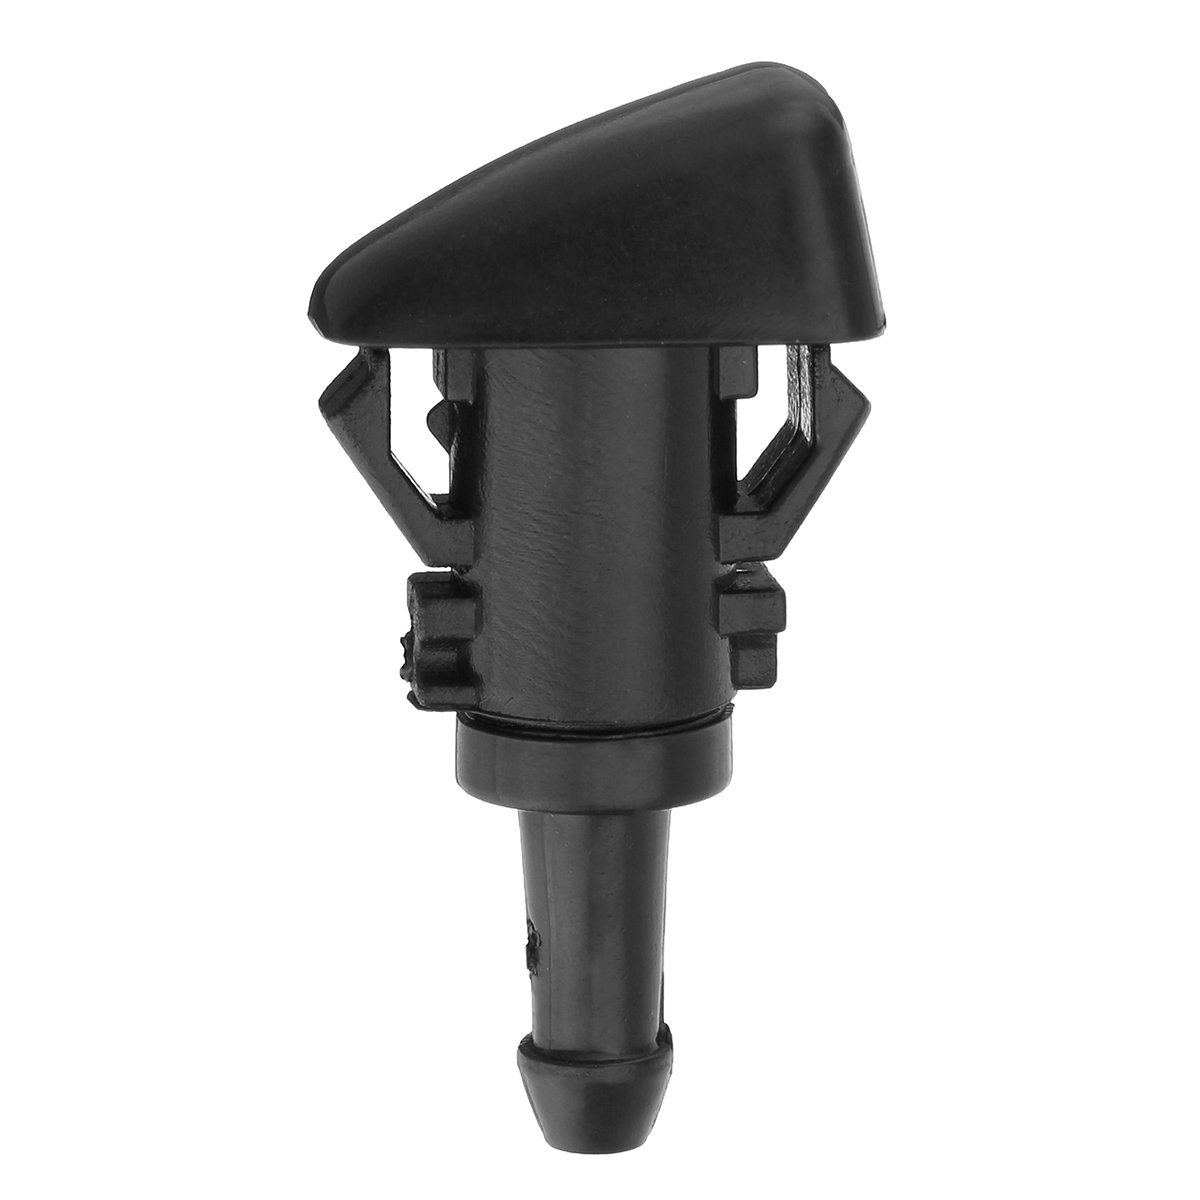 Windshield Washer Wiper Water Spray Nozzle For Chrysler 300 Dodge Ram Charger 2